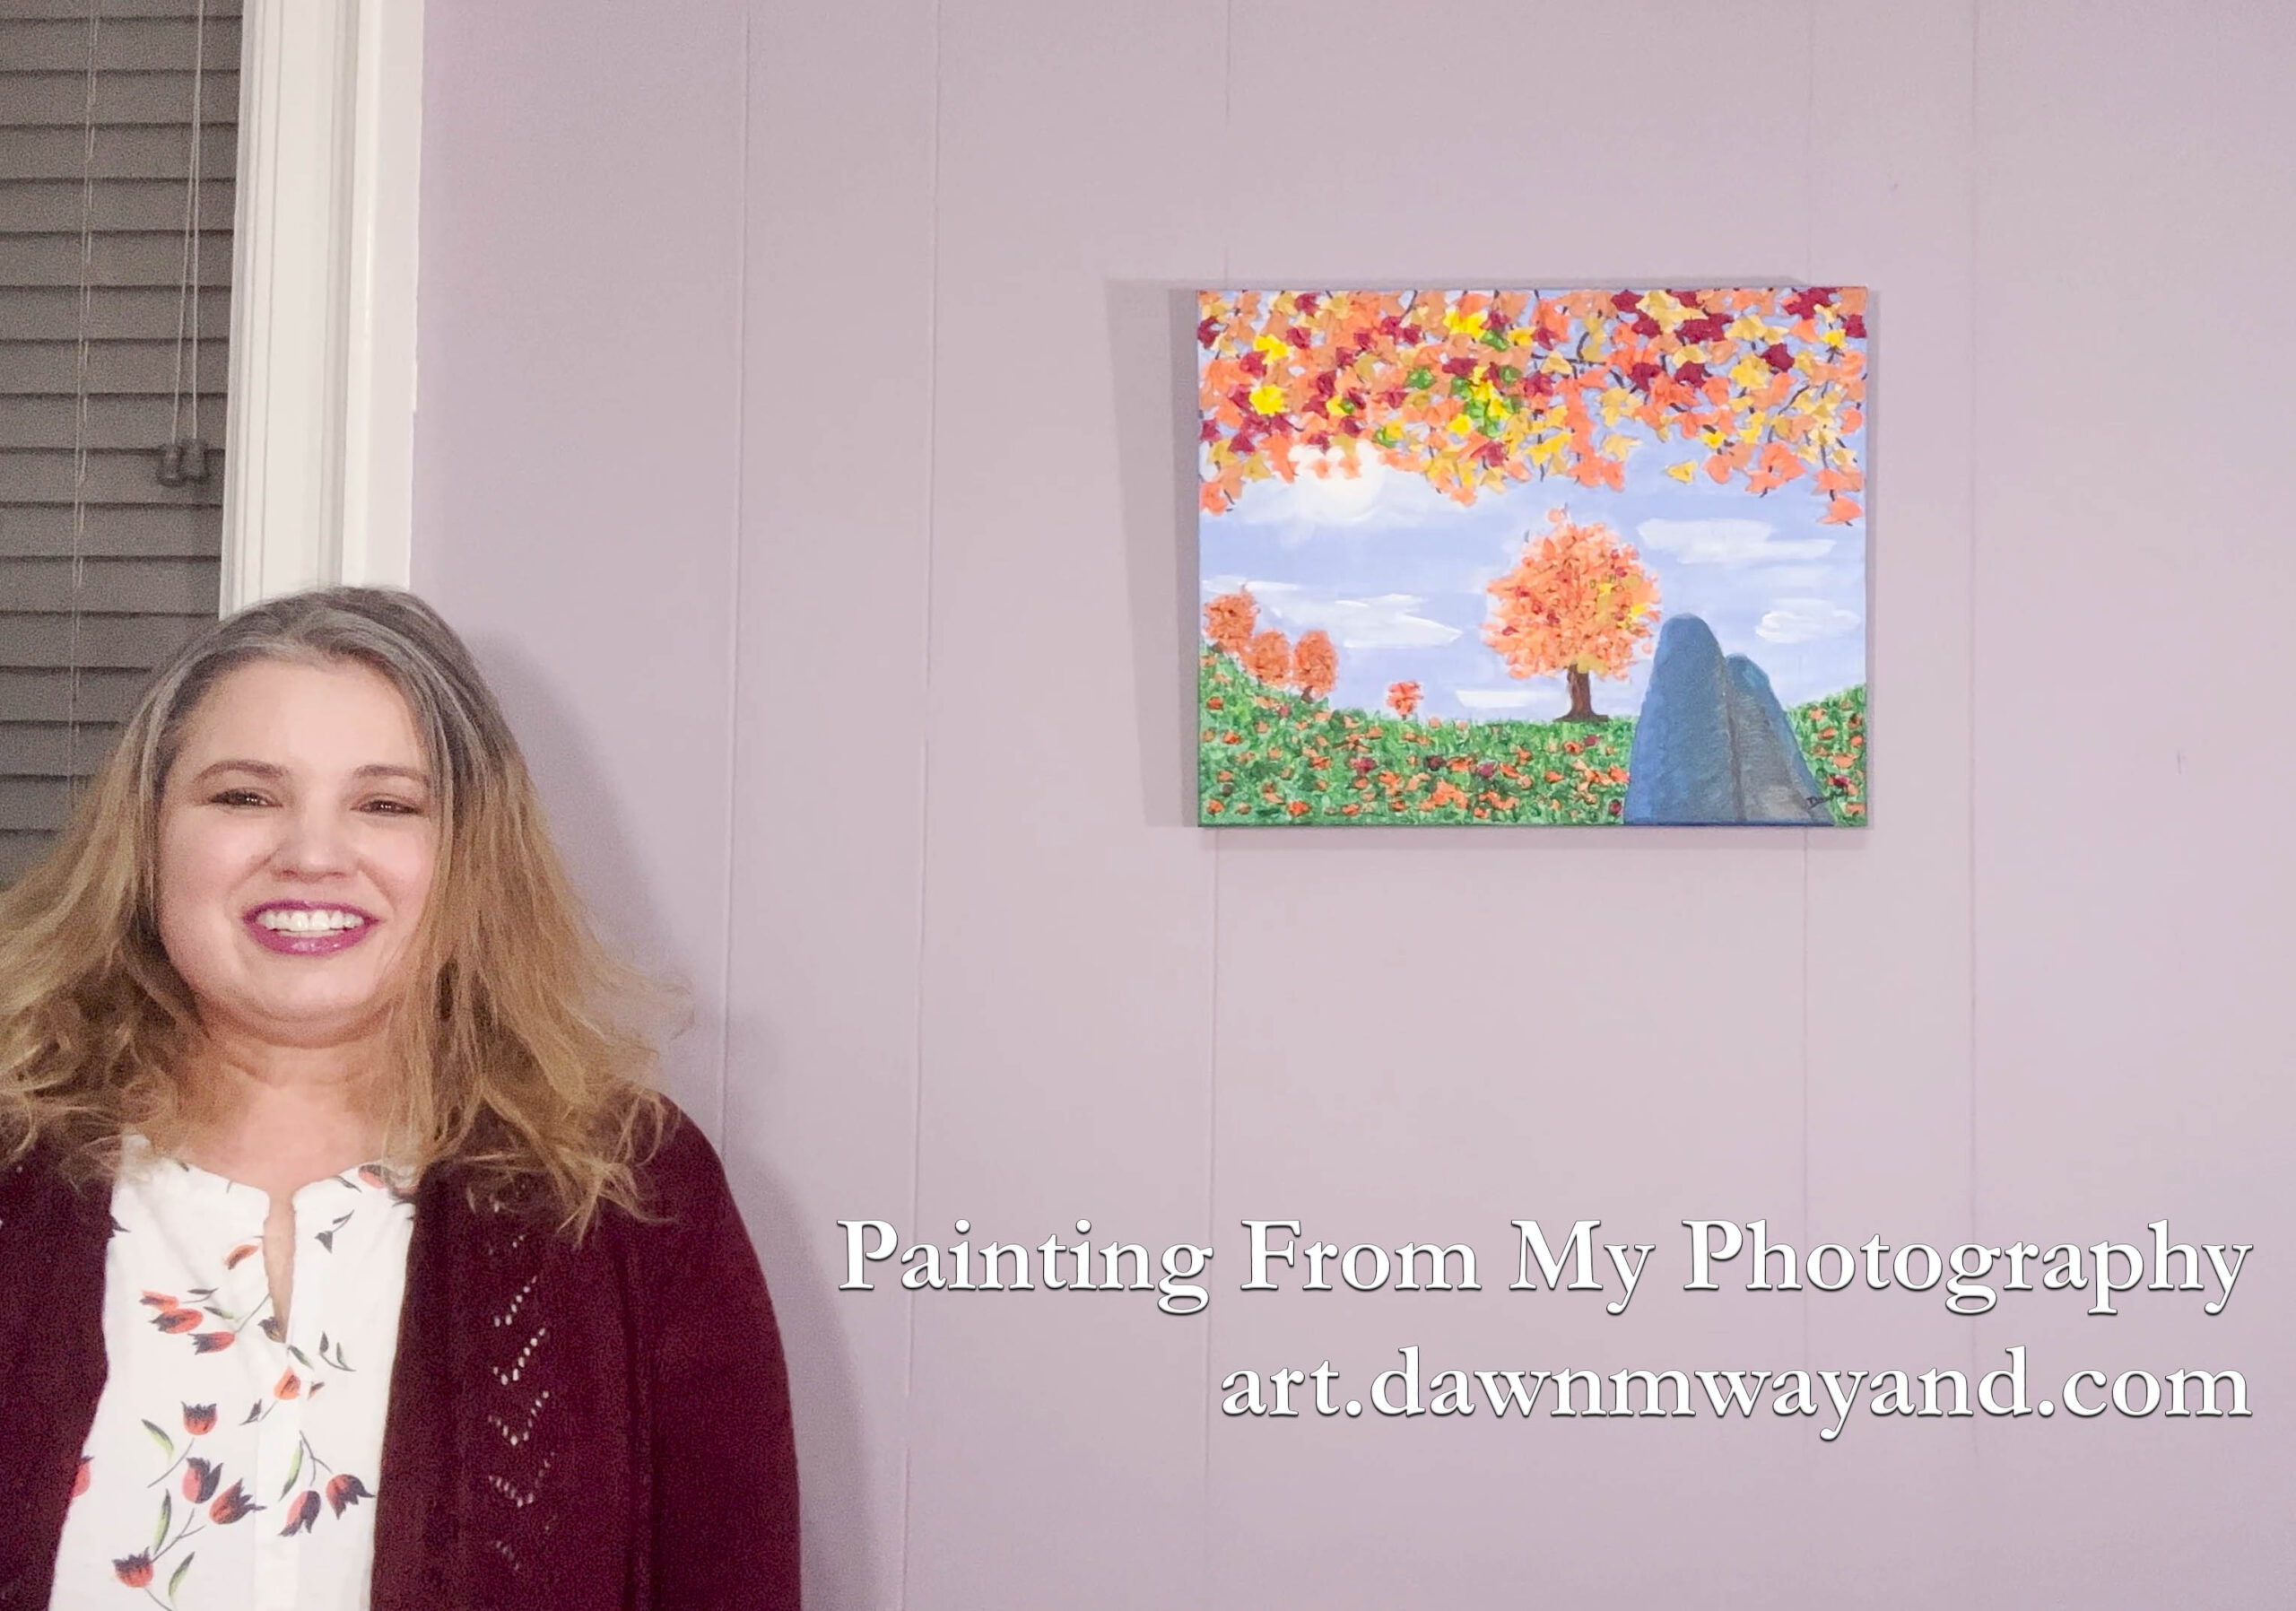 Artwork Insights: Painting From My Photography